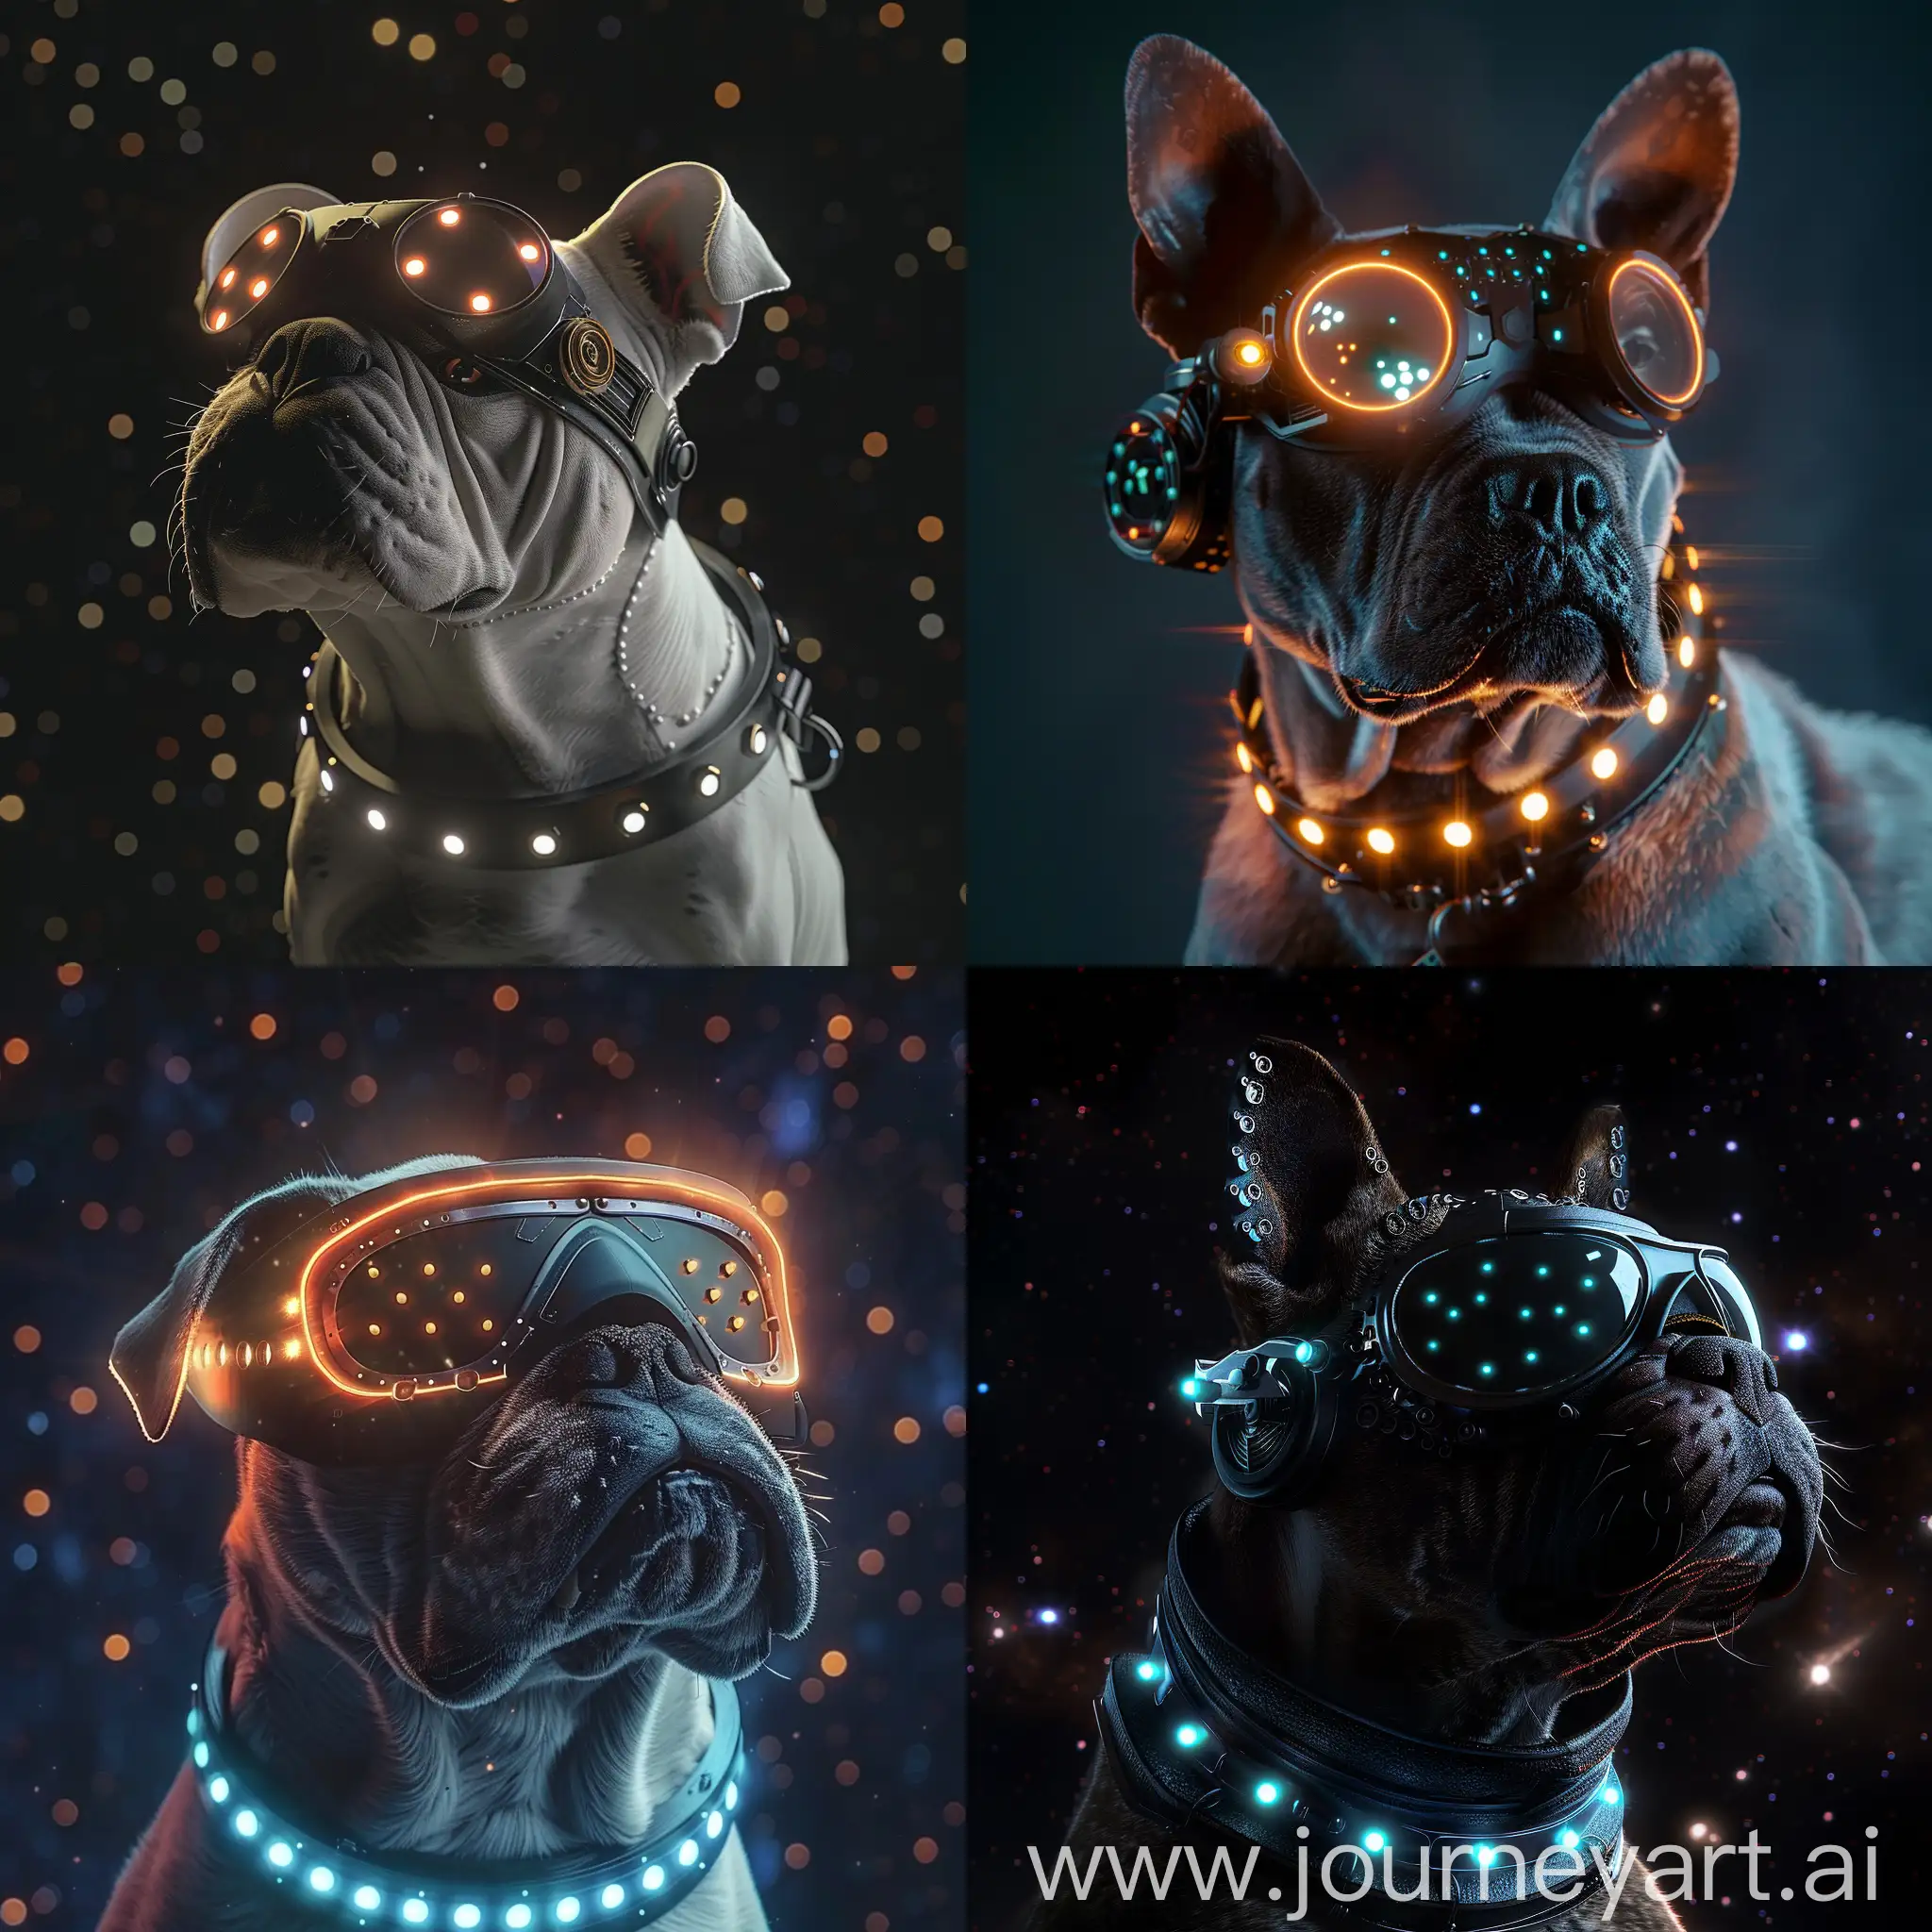 Dog Bulldog in space has fusion goggles, a rim around the eye with an indicator of jackals in the form of glowing dots, and a collar 